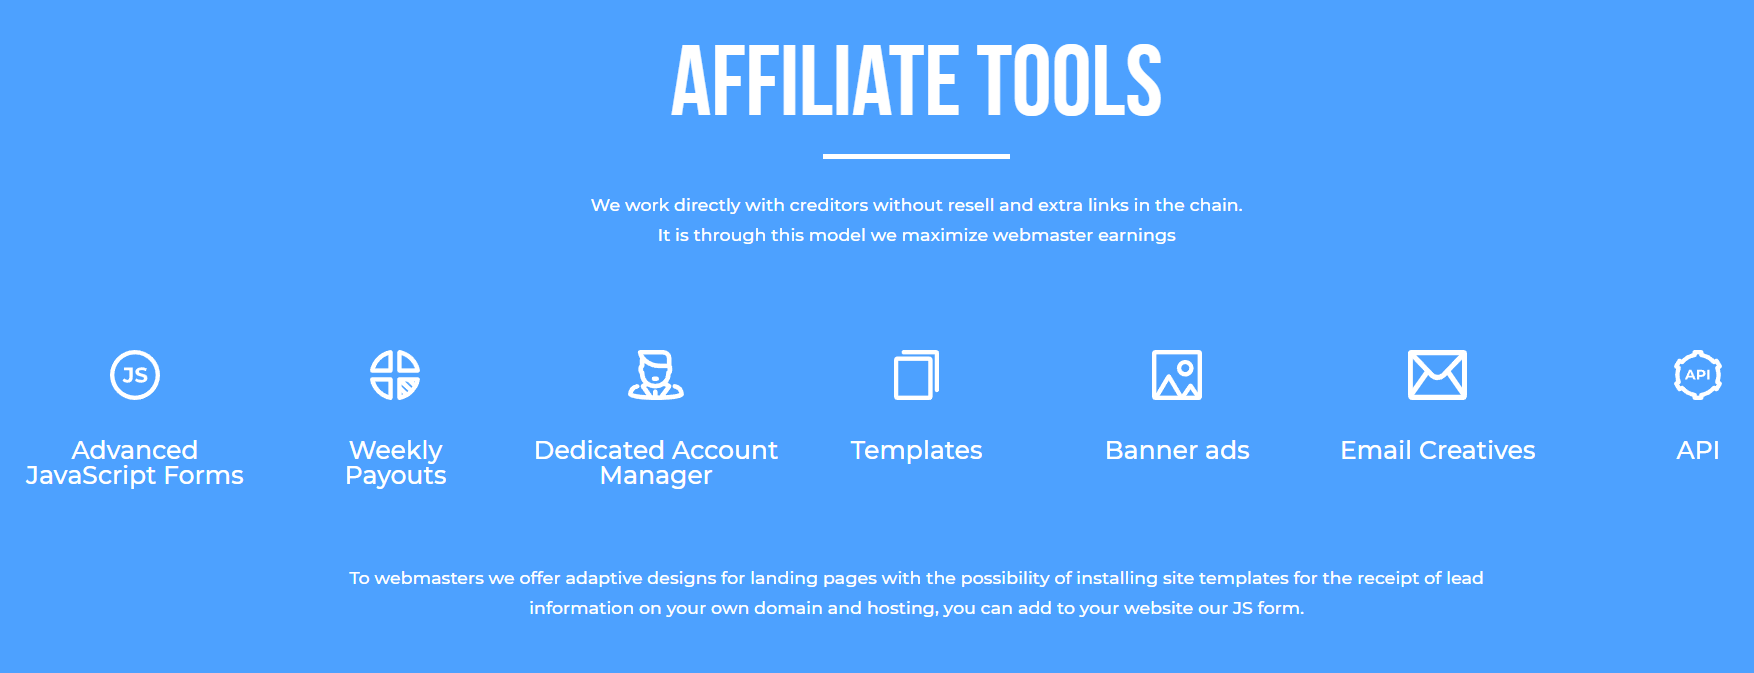 Affiliate Tools Offered By LeadNetwork